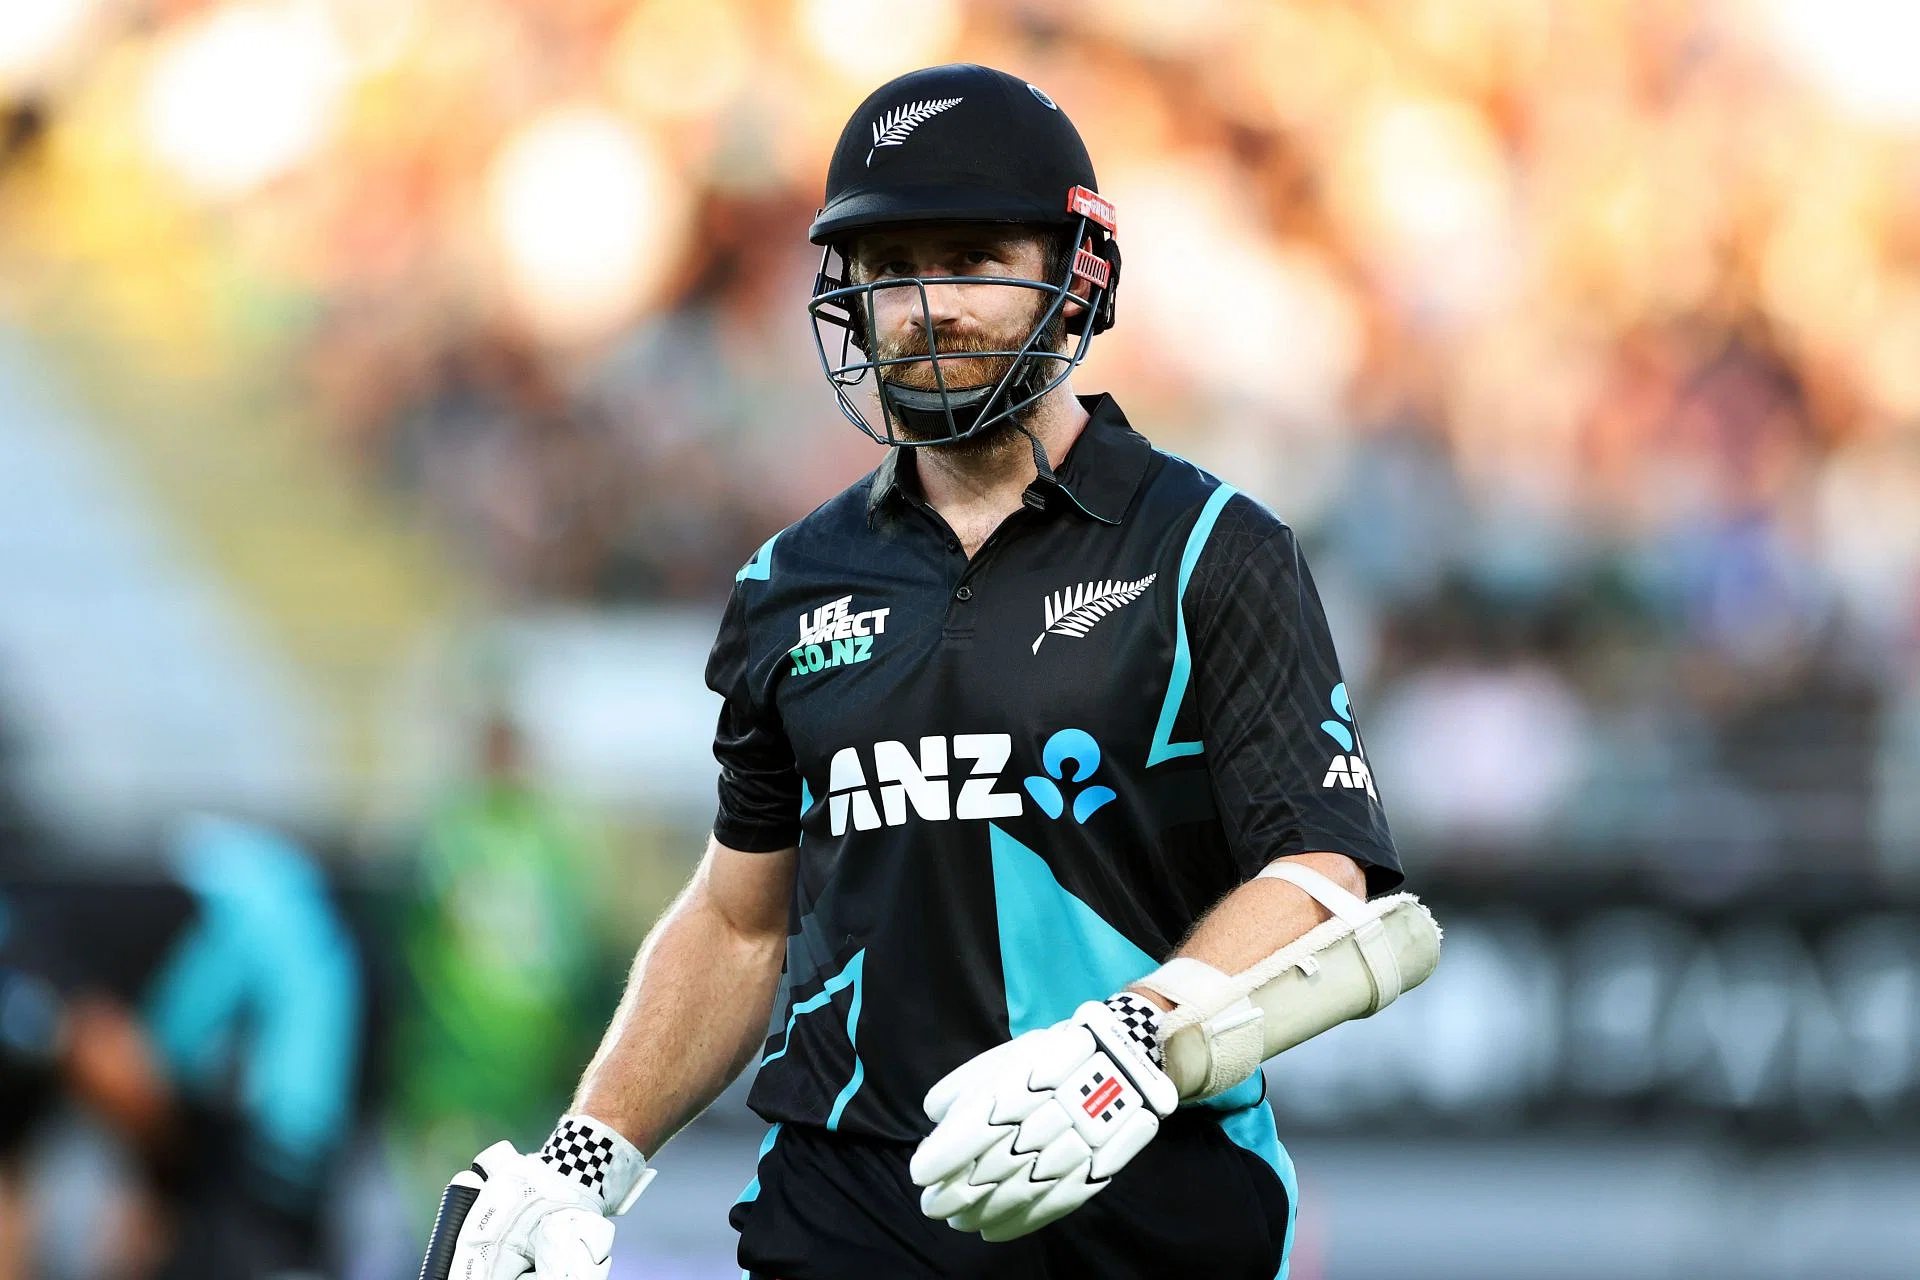 “I’m Confident He Will Be Alright” – Gary Stead On Kane Williamson